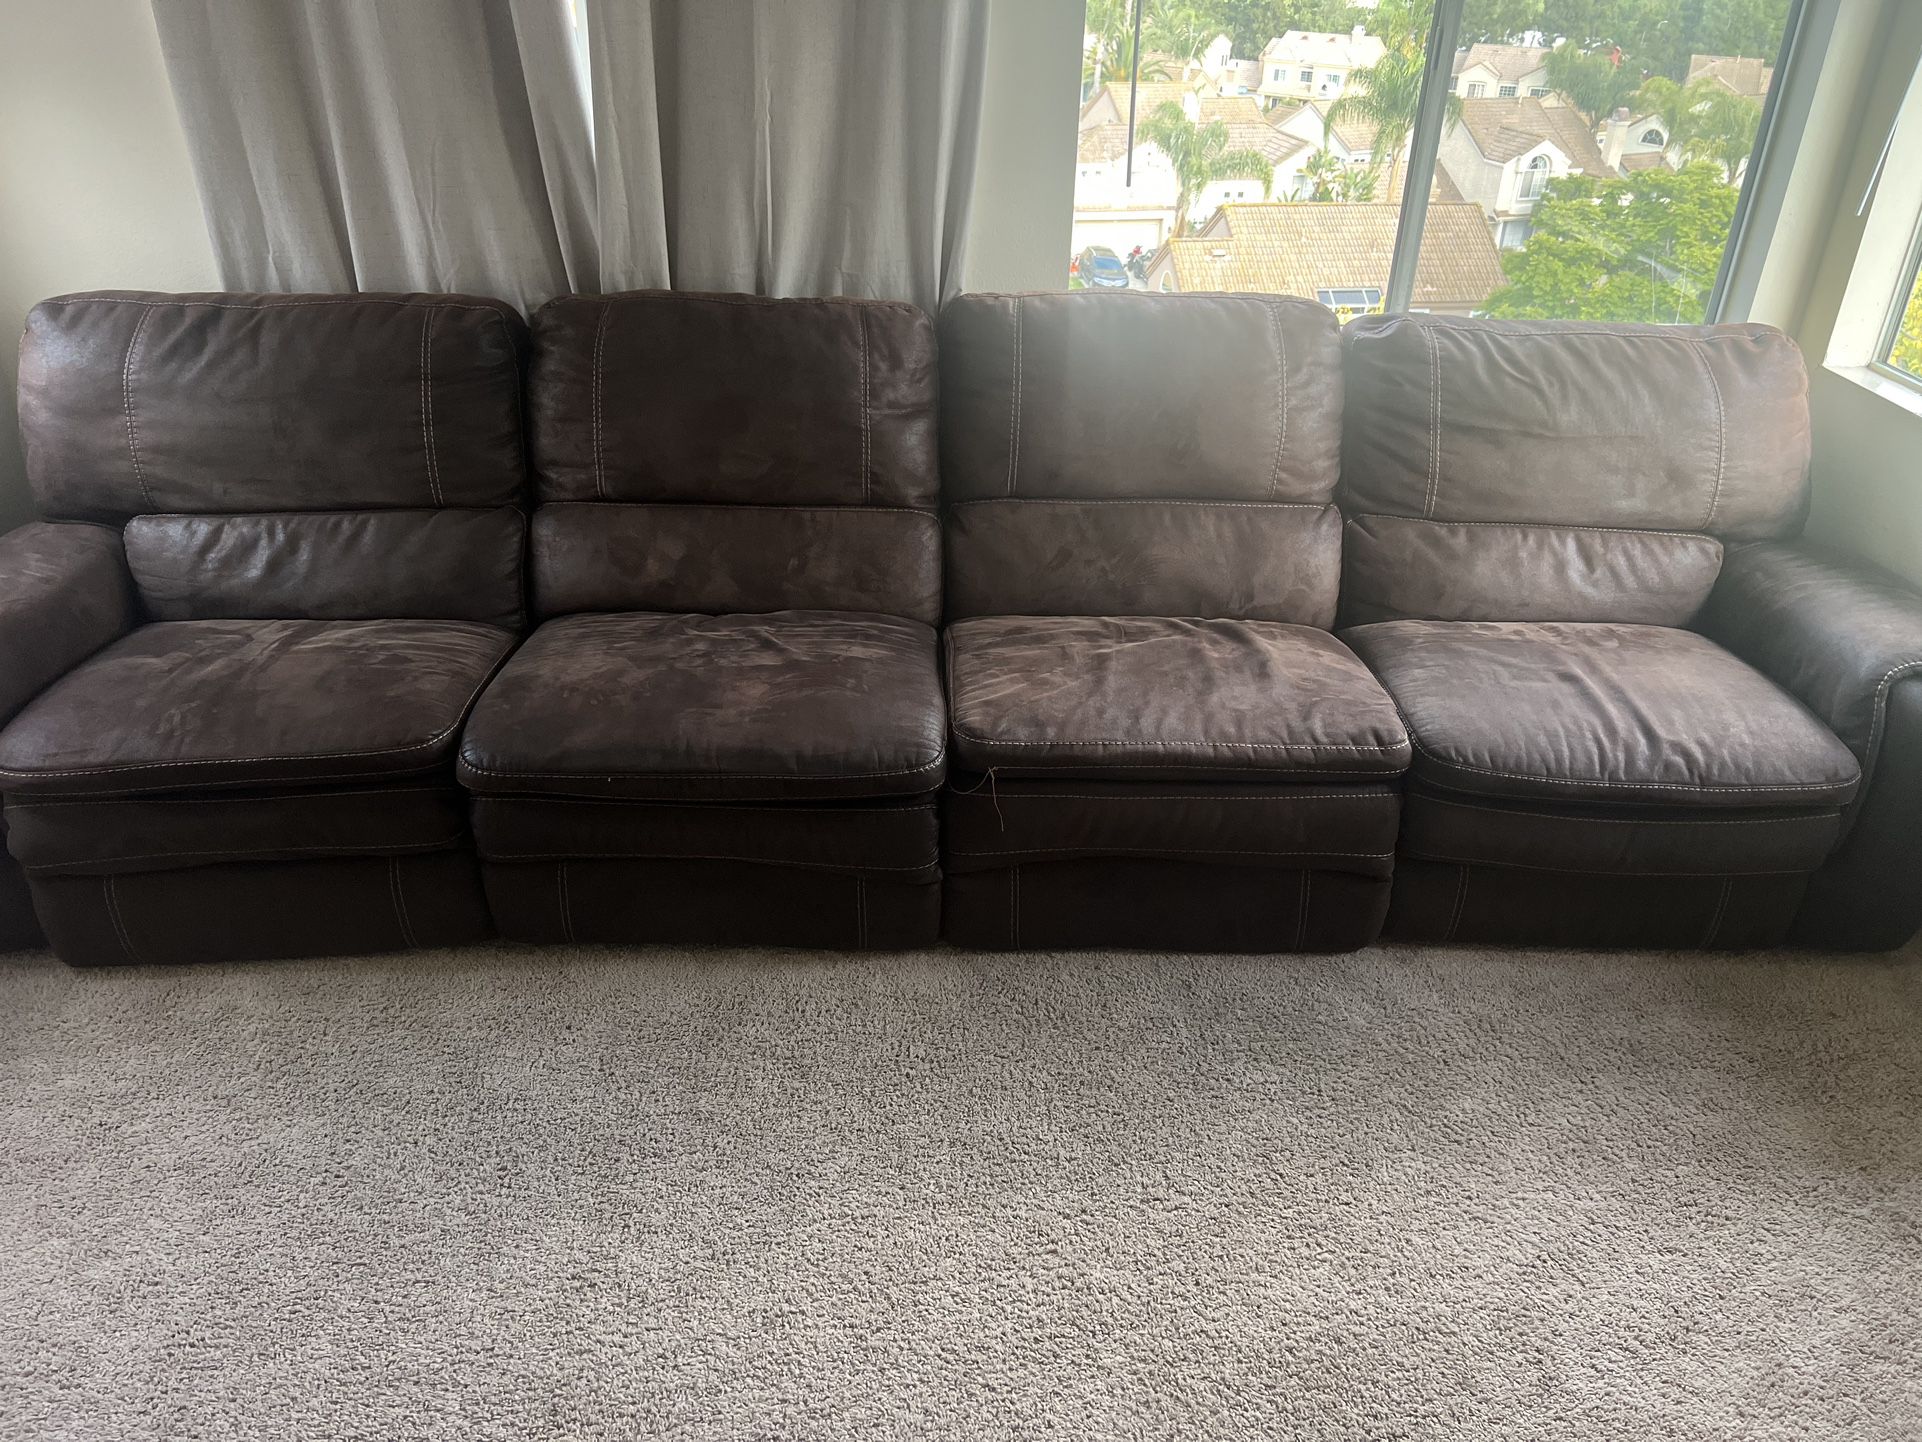 Reclining couch FREE